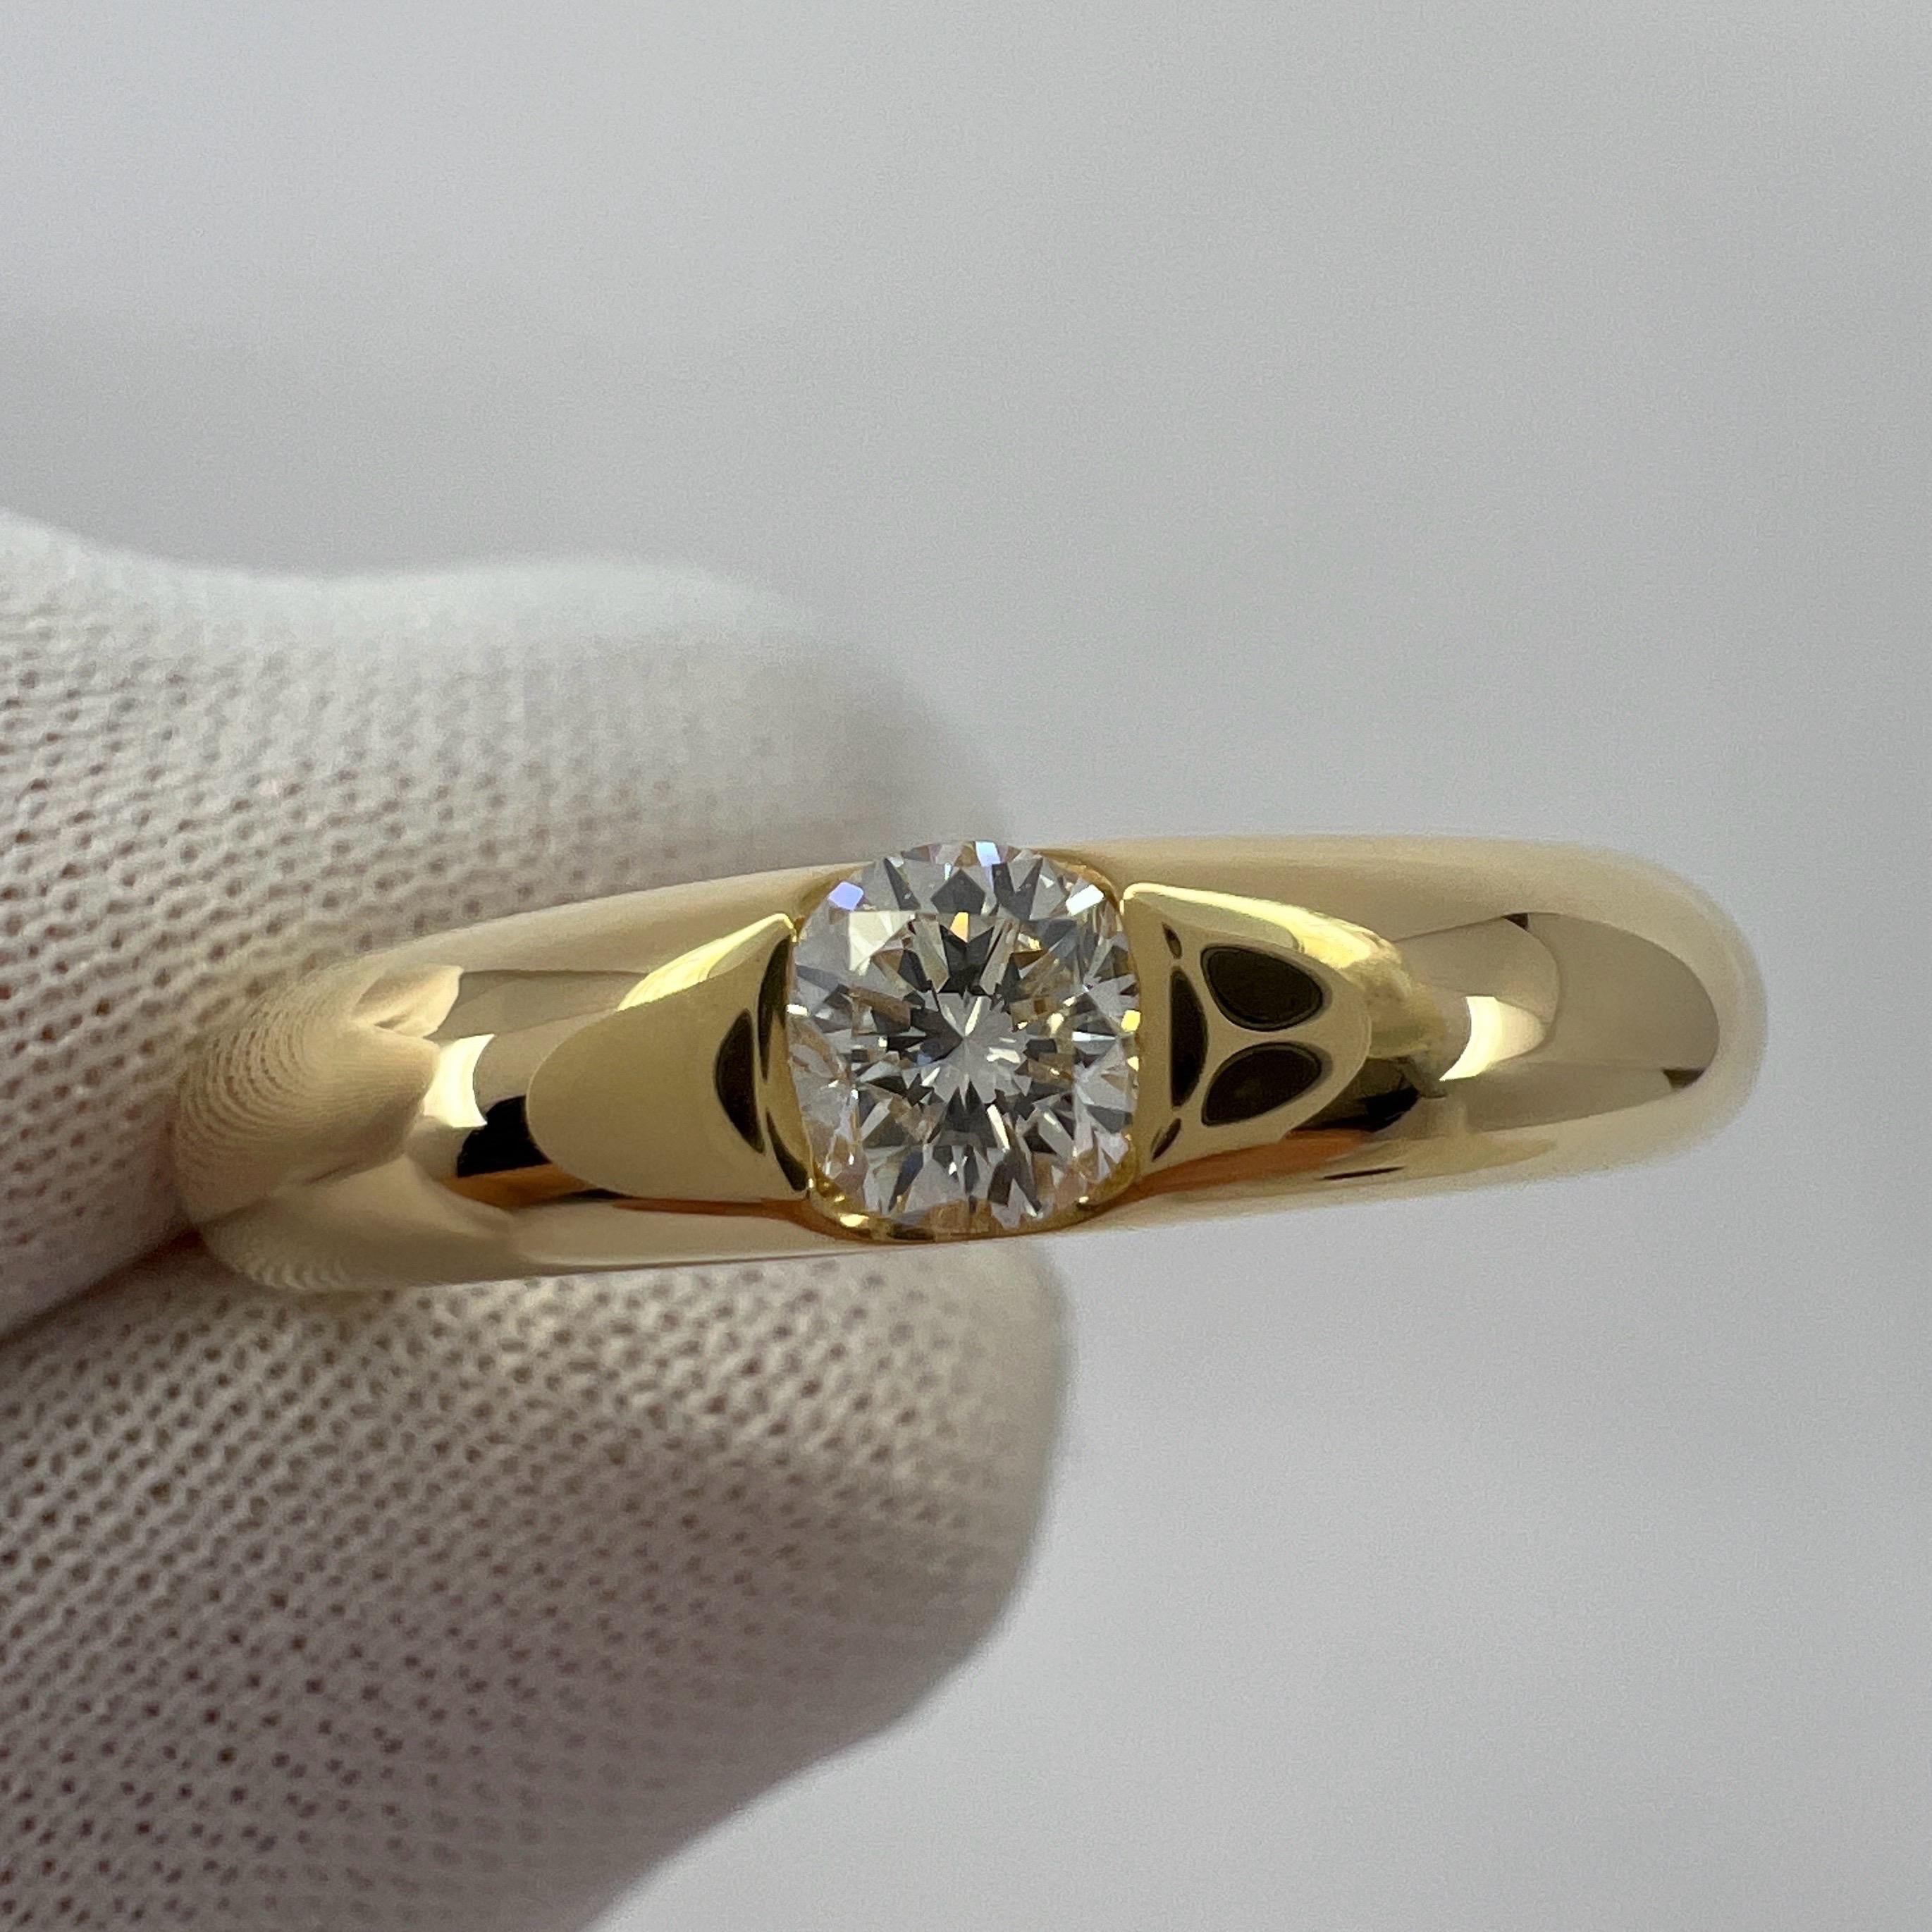 Vintage Cartier Round Diamond Ellipse 18k Yellow Gold Solitaire Band Ring US5 49 For Sale 3